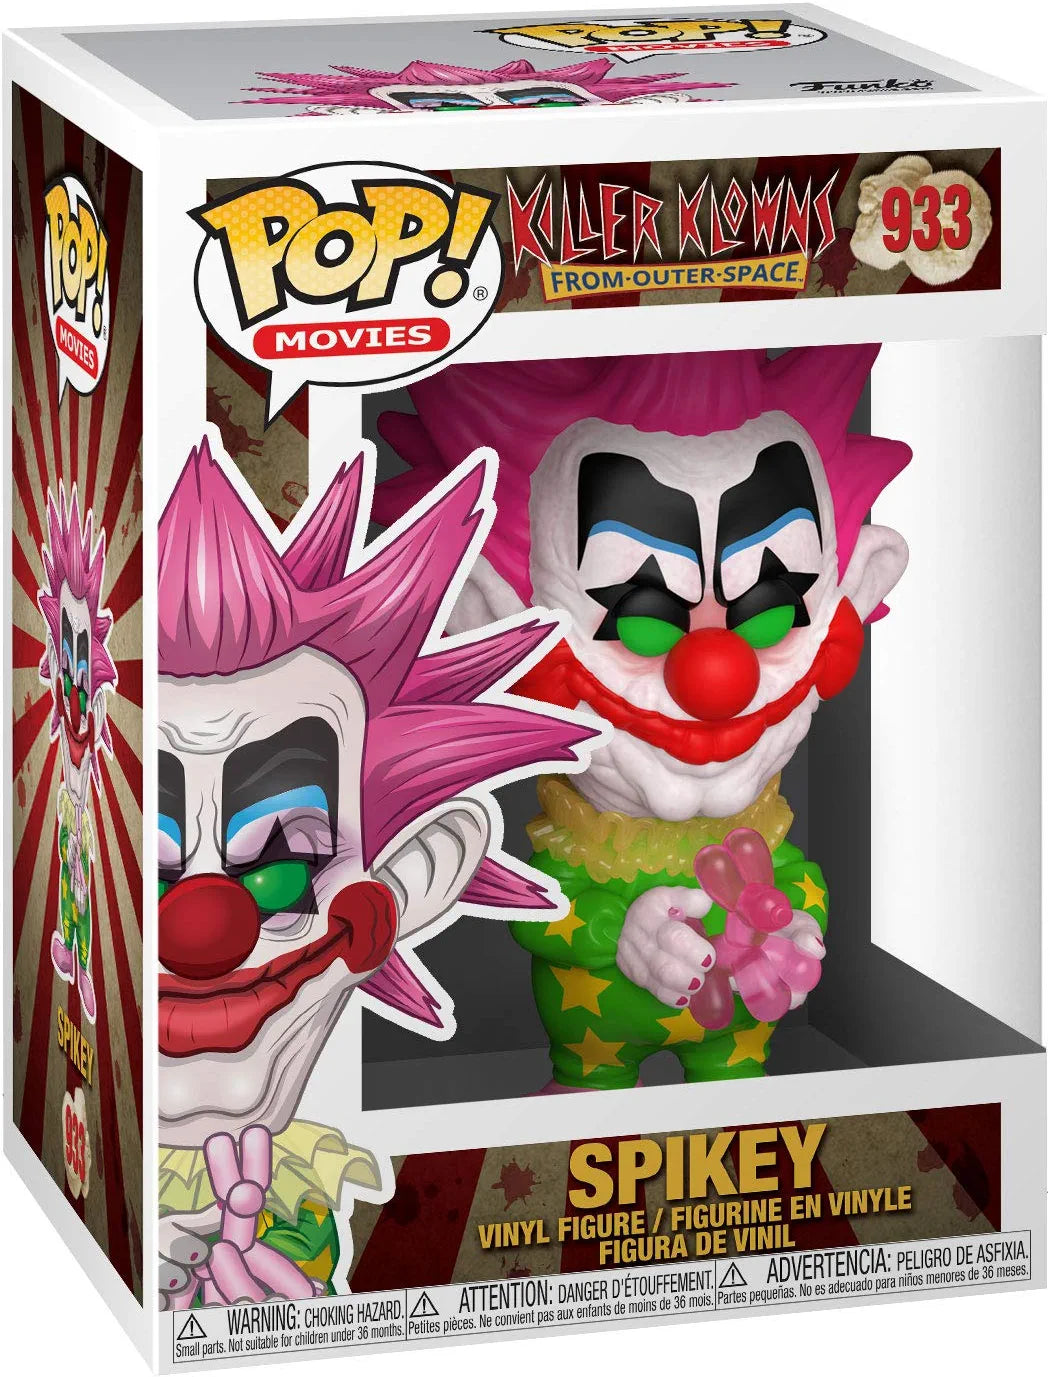 FUNKO POP! MOVIES: Killer Klowns from Outer Space - Spikey